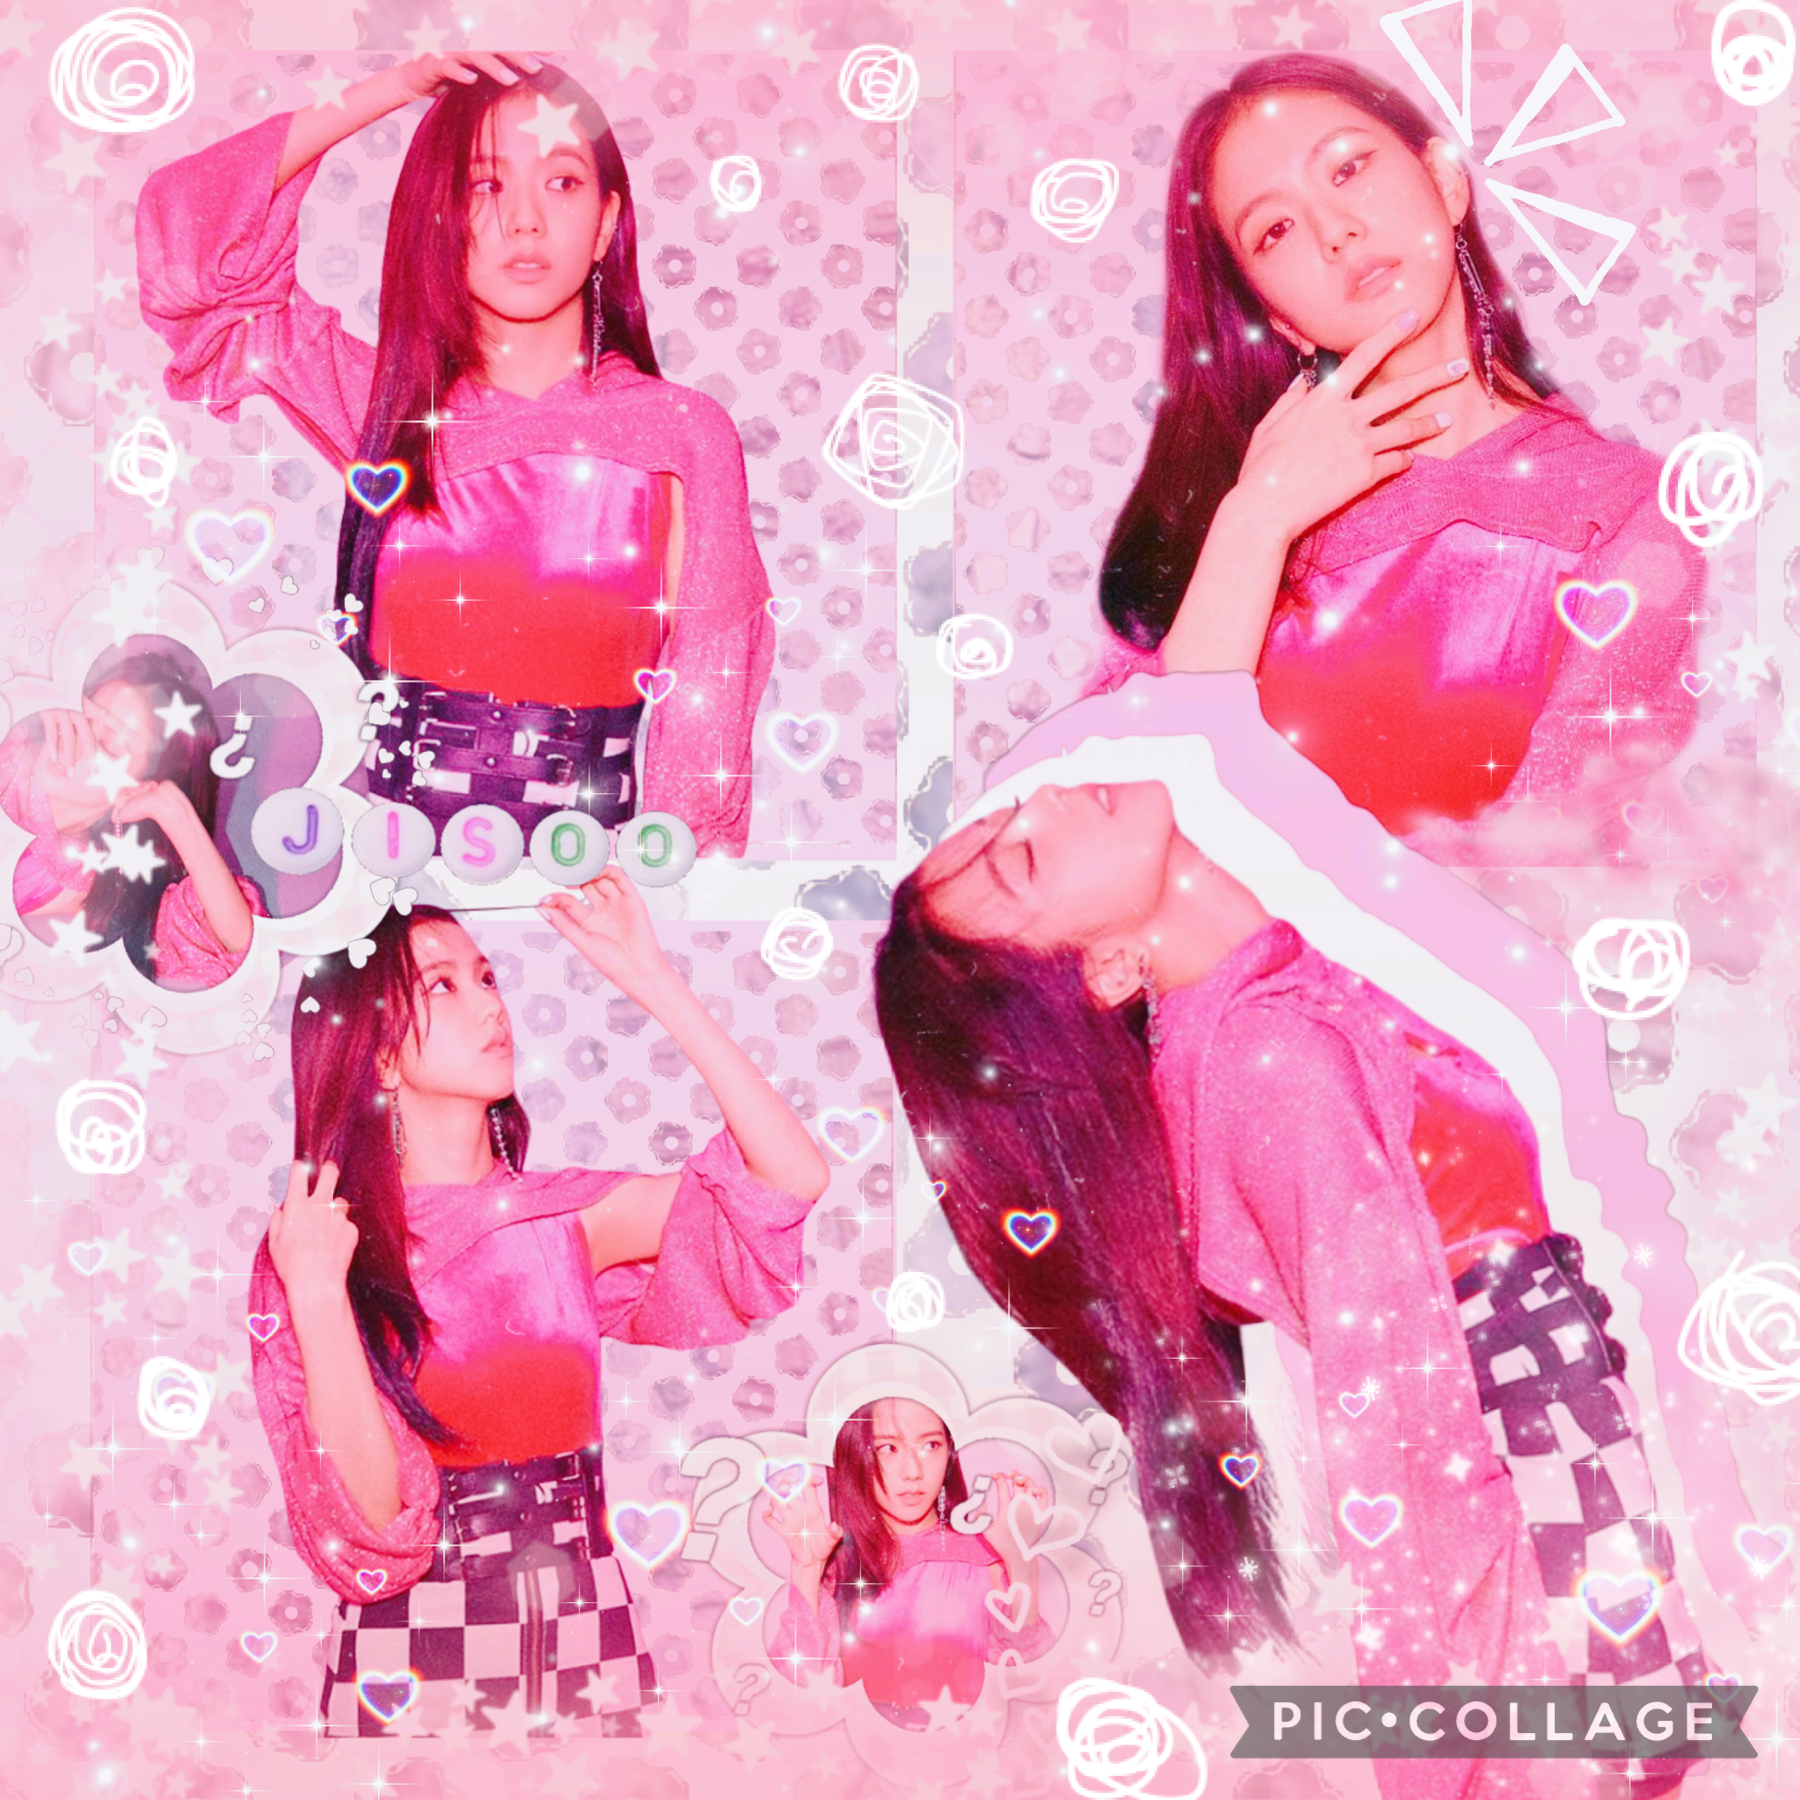 🌸hi bbys🌸
hey besties!! how r u this fine day? i’m about to go get the bts meal at mcdonald’s and im so excited 😌 oh also- just a lil simple edit of one of fav bp members (they’re all my fav 🥲) not sure i love it but :/ anyways ilysmmm 💗💗